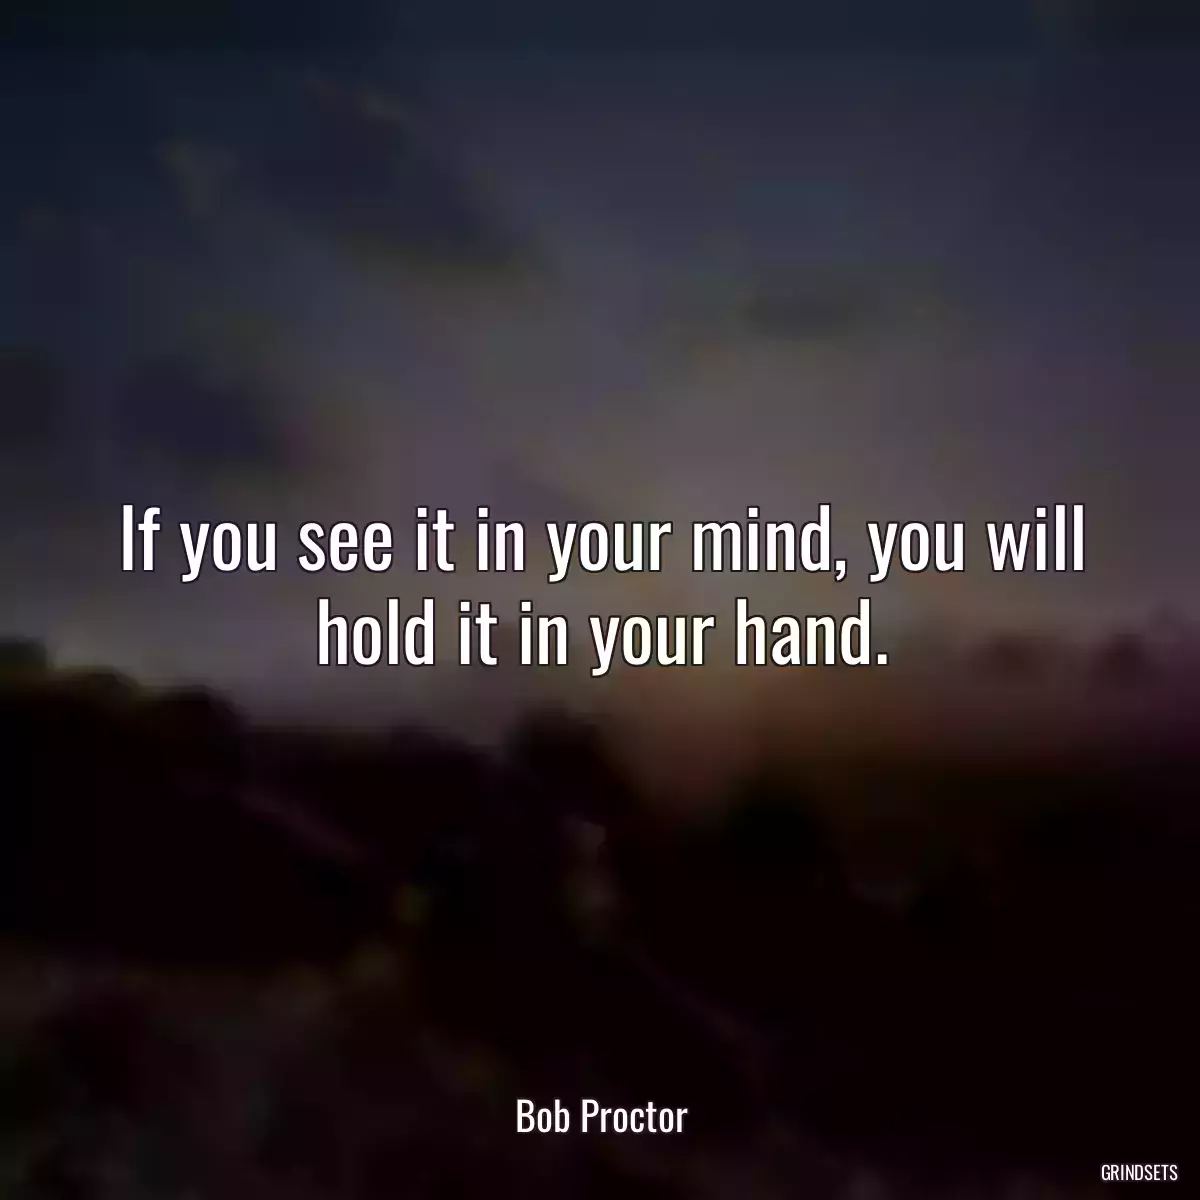 If you see it in your mind, you will hold it in your hand.